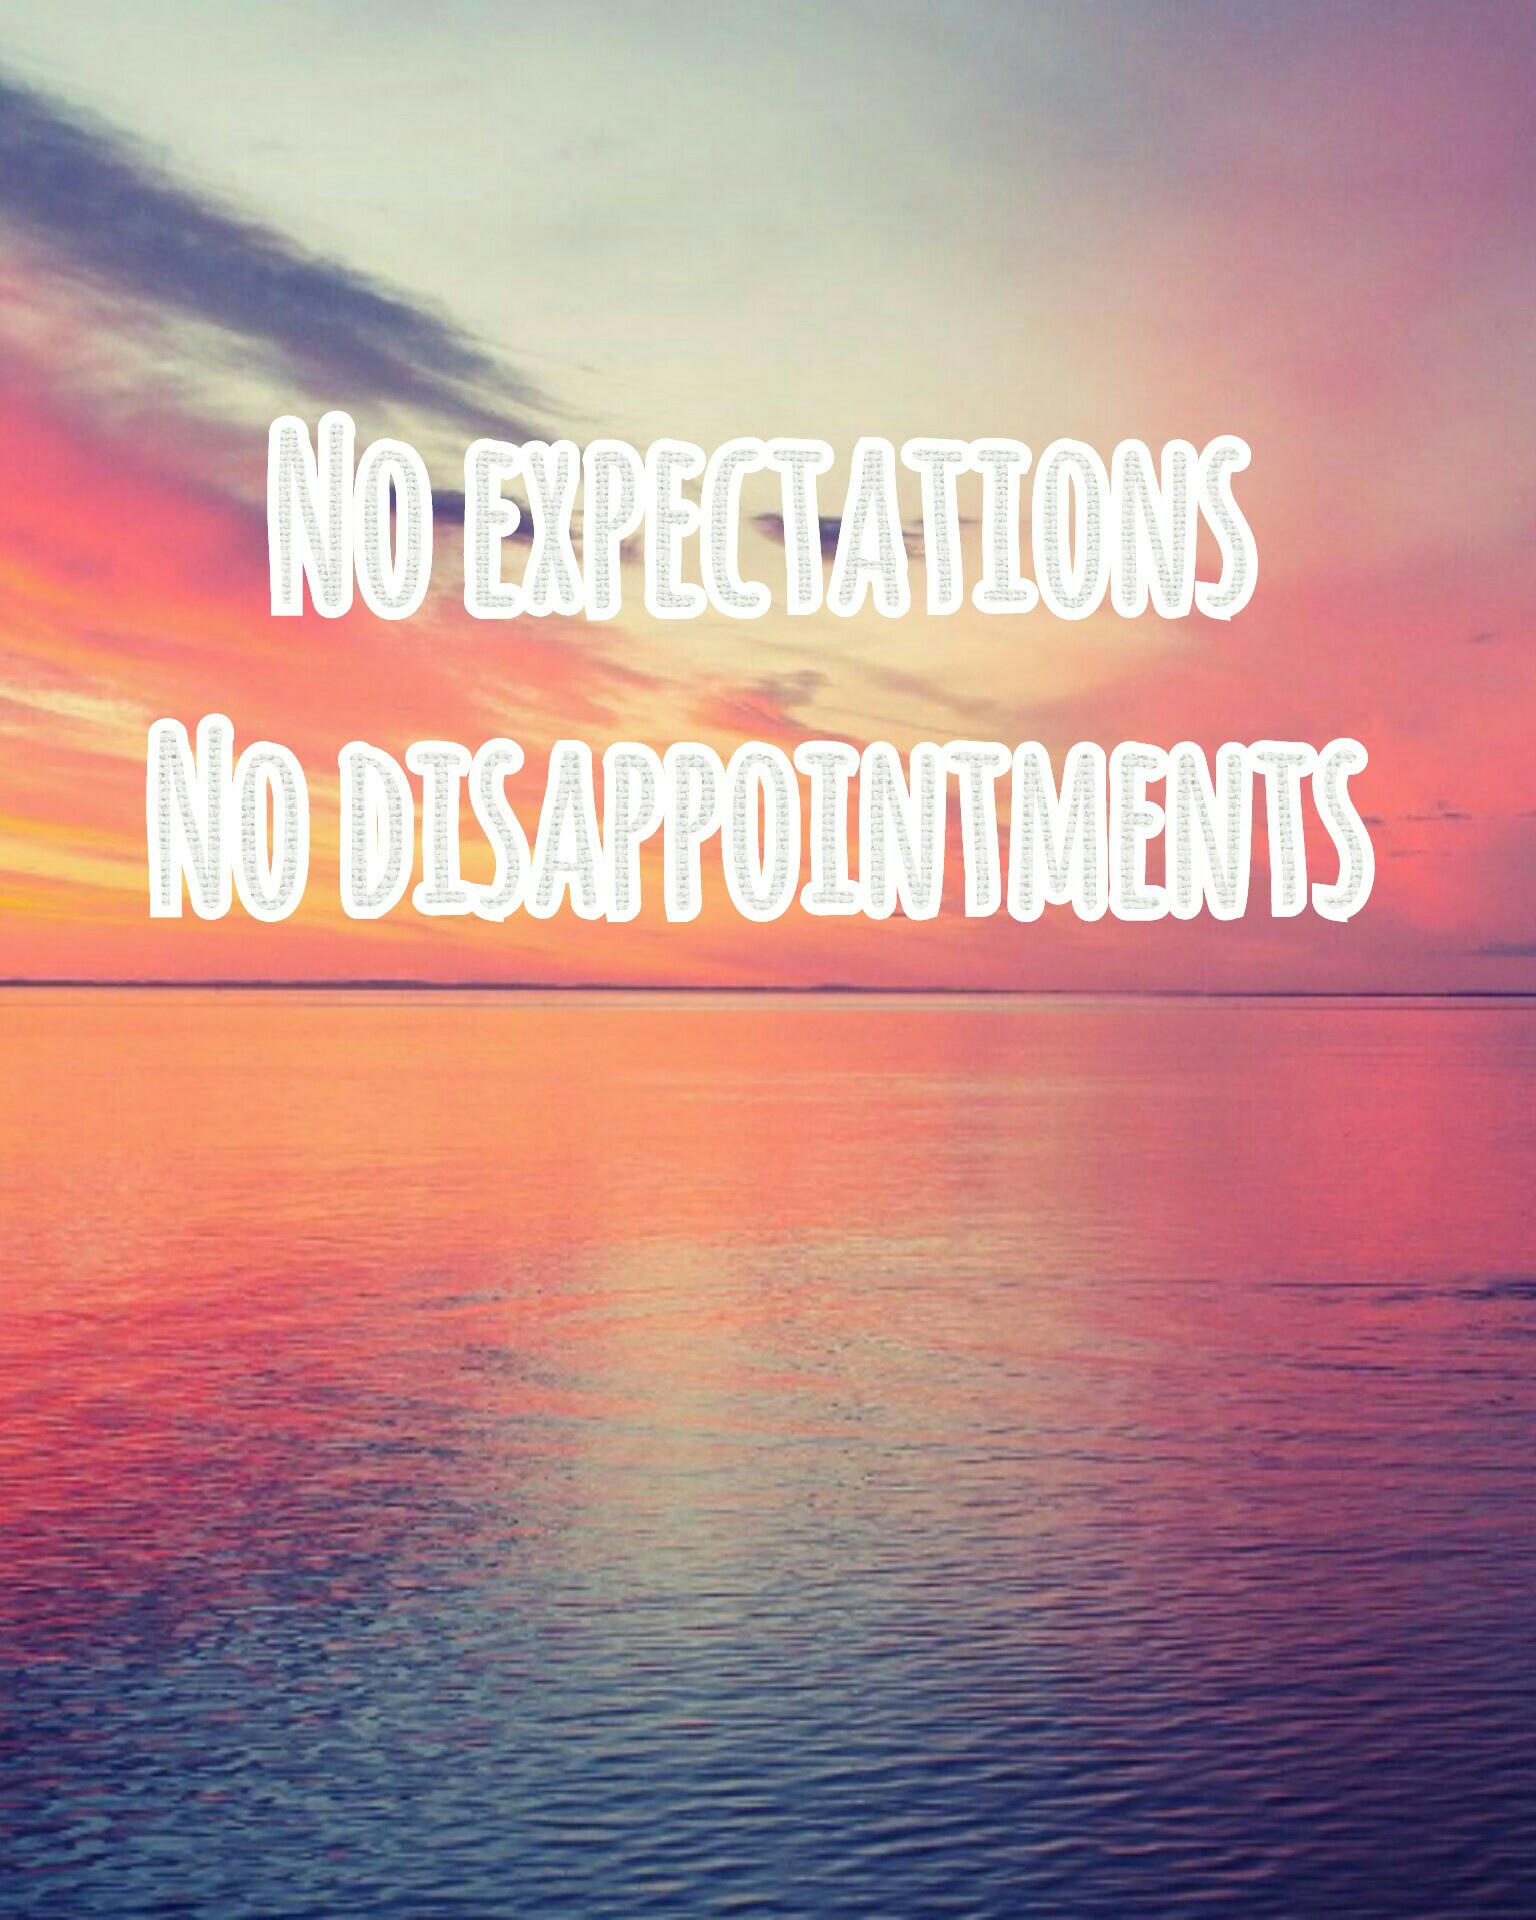 No disappointments 